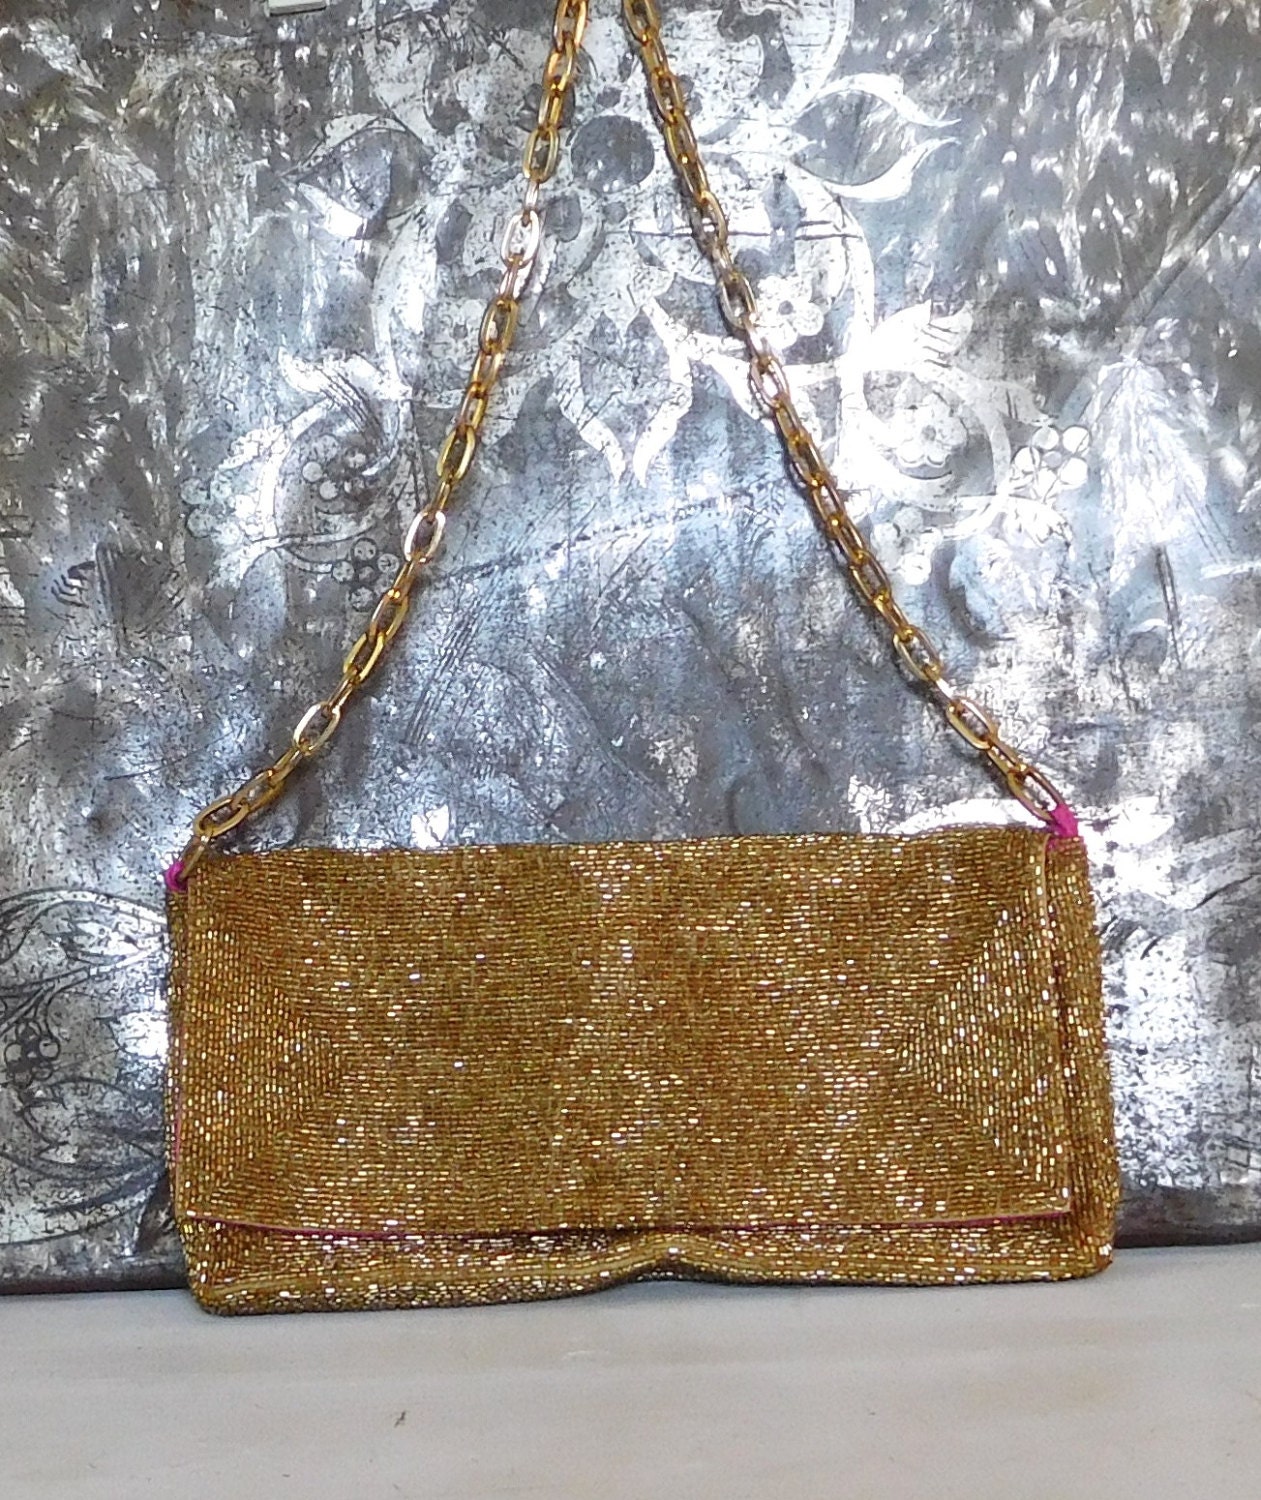 Gold Beaded Clutch Chain Strap Purse Hot Pink Fabric Vintage